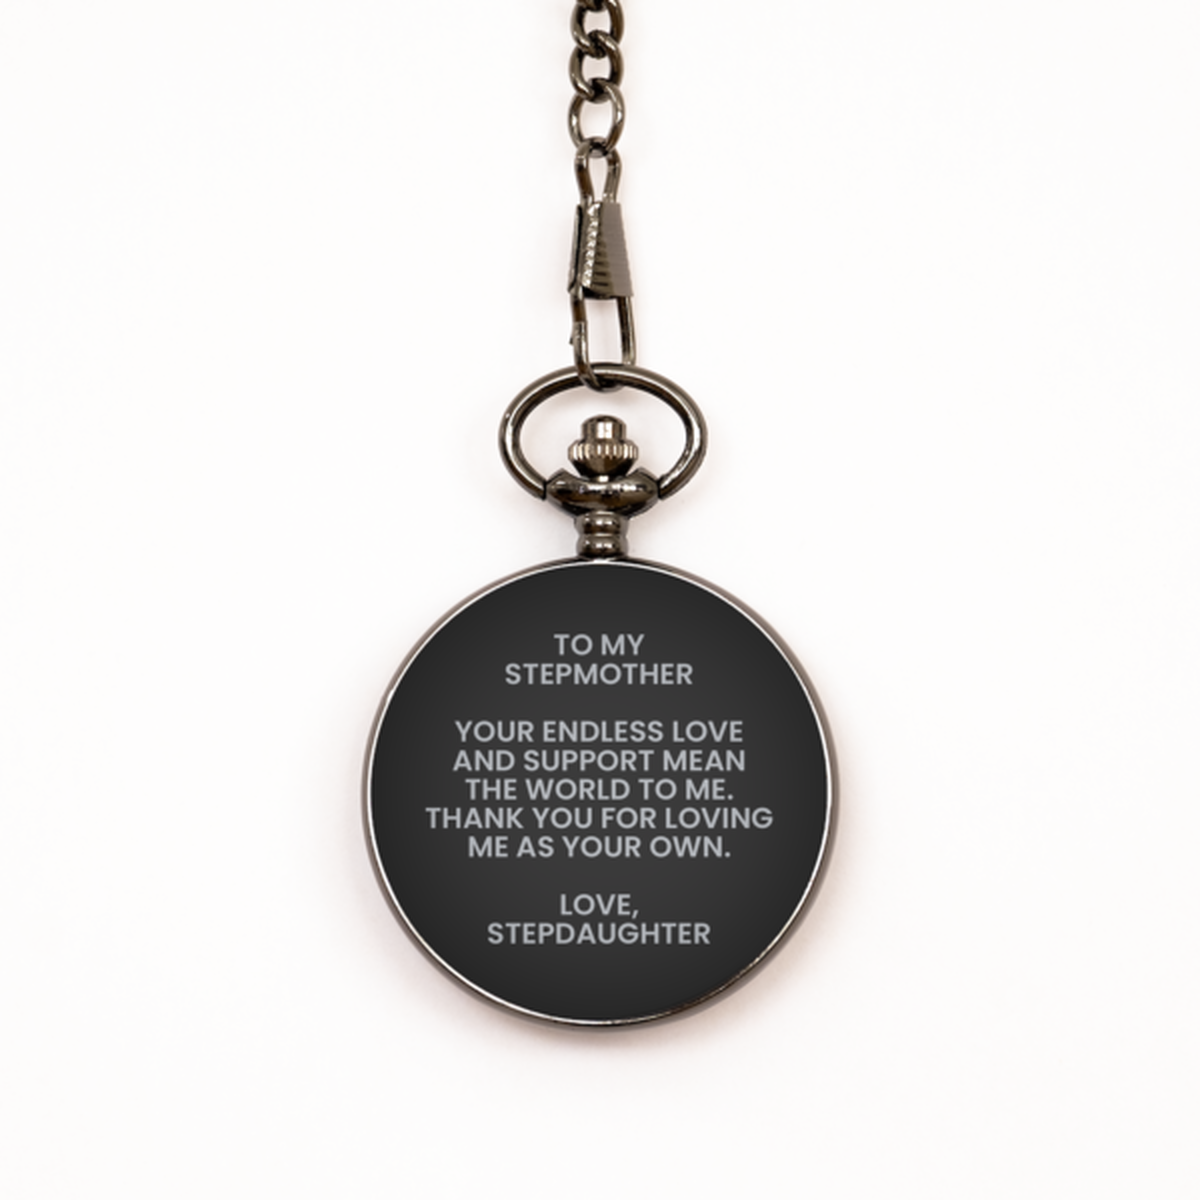 To My Stepmother Black Pocket Watch, Your Endless Love, Mothers Day Gifts For Stepmother From Stepdaughter, Birthday Gifts For Women